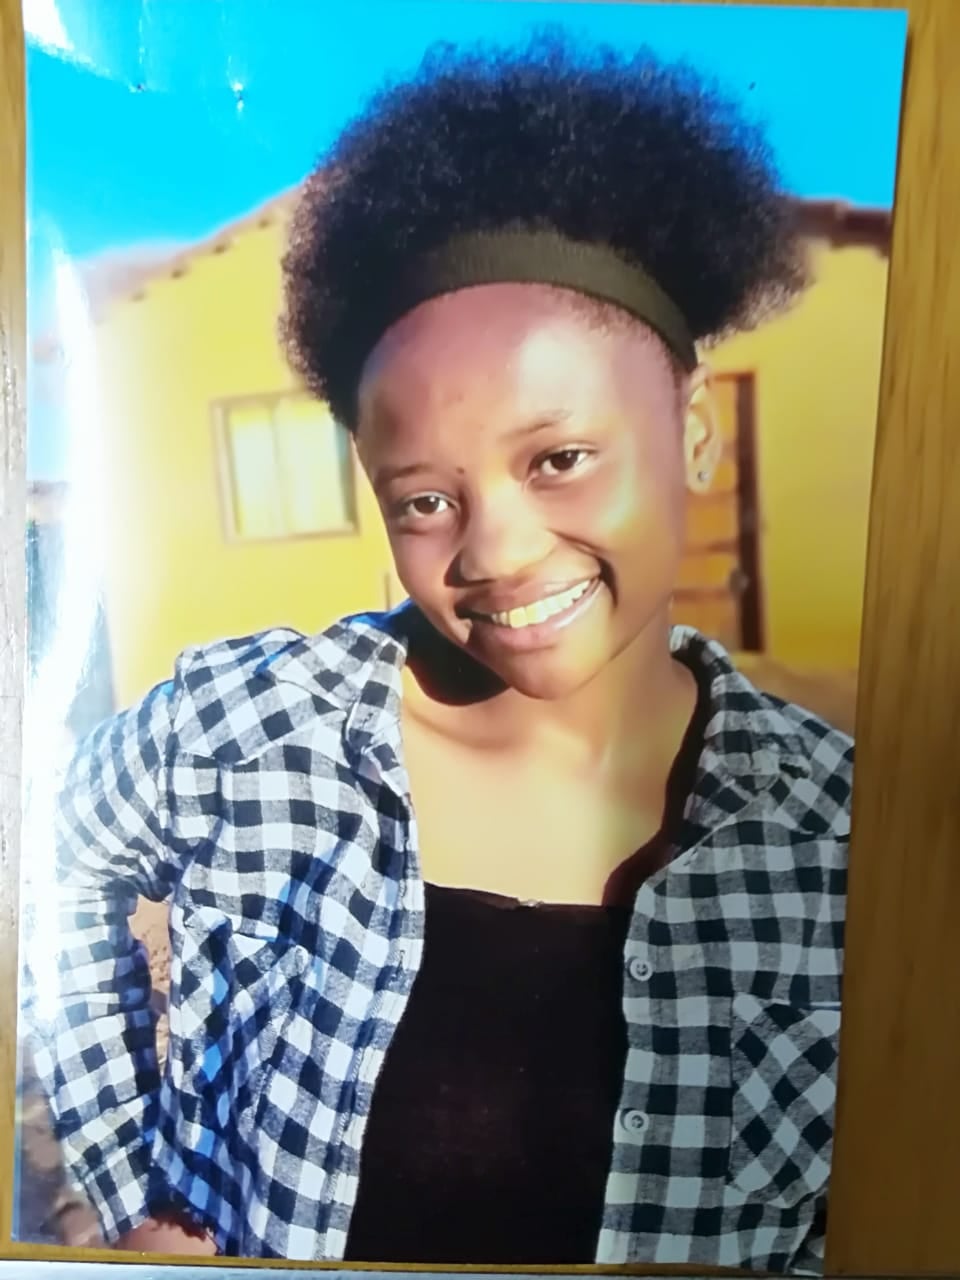 Mahikeng Police request community assistance in locating a missing person